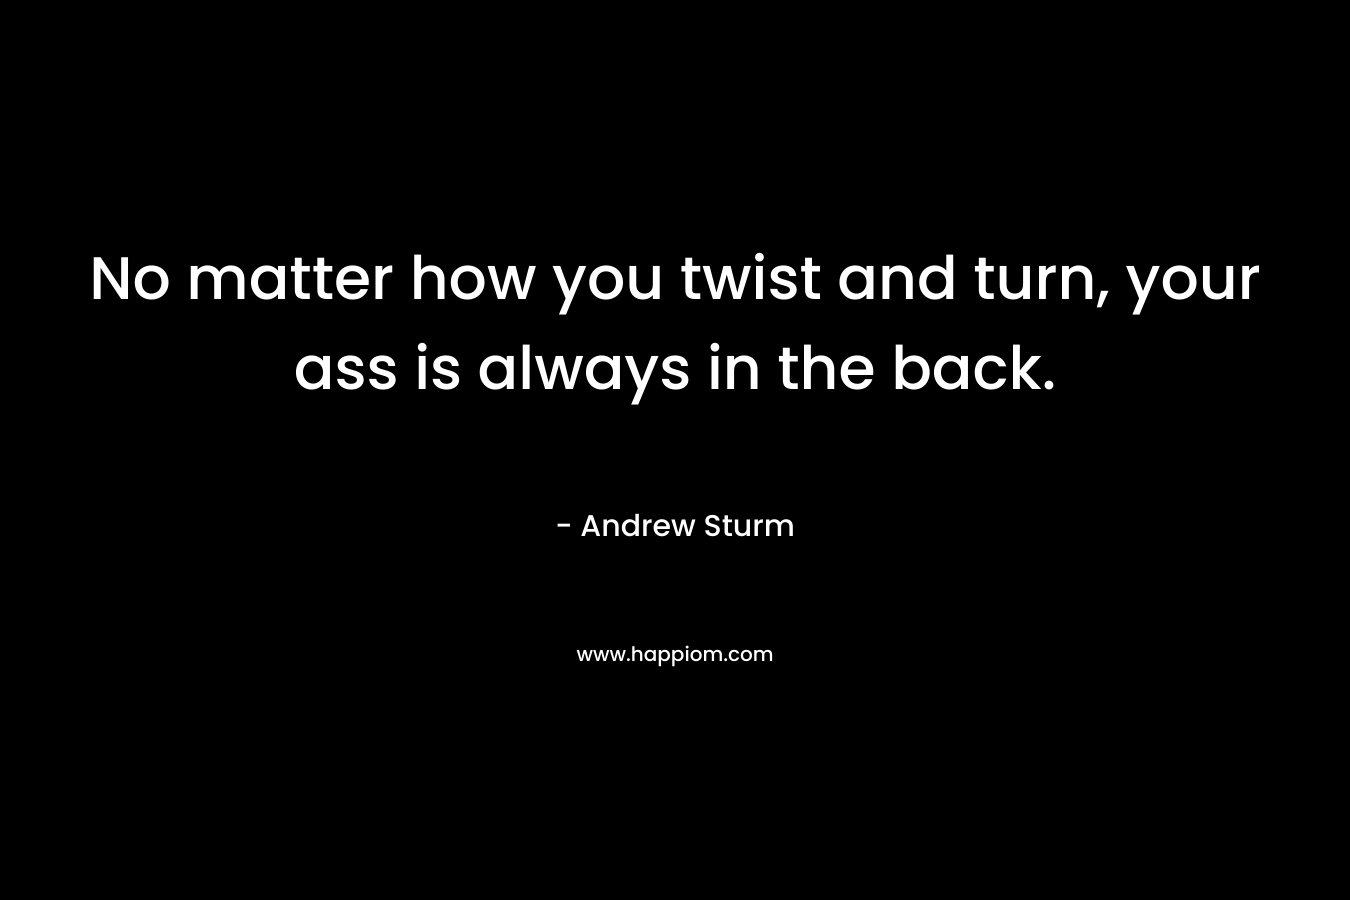 No matter how you twist and turn, your ass is always in the back.